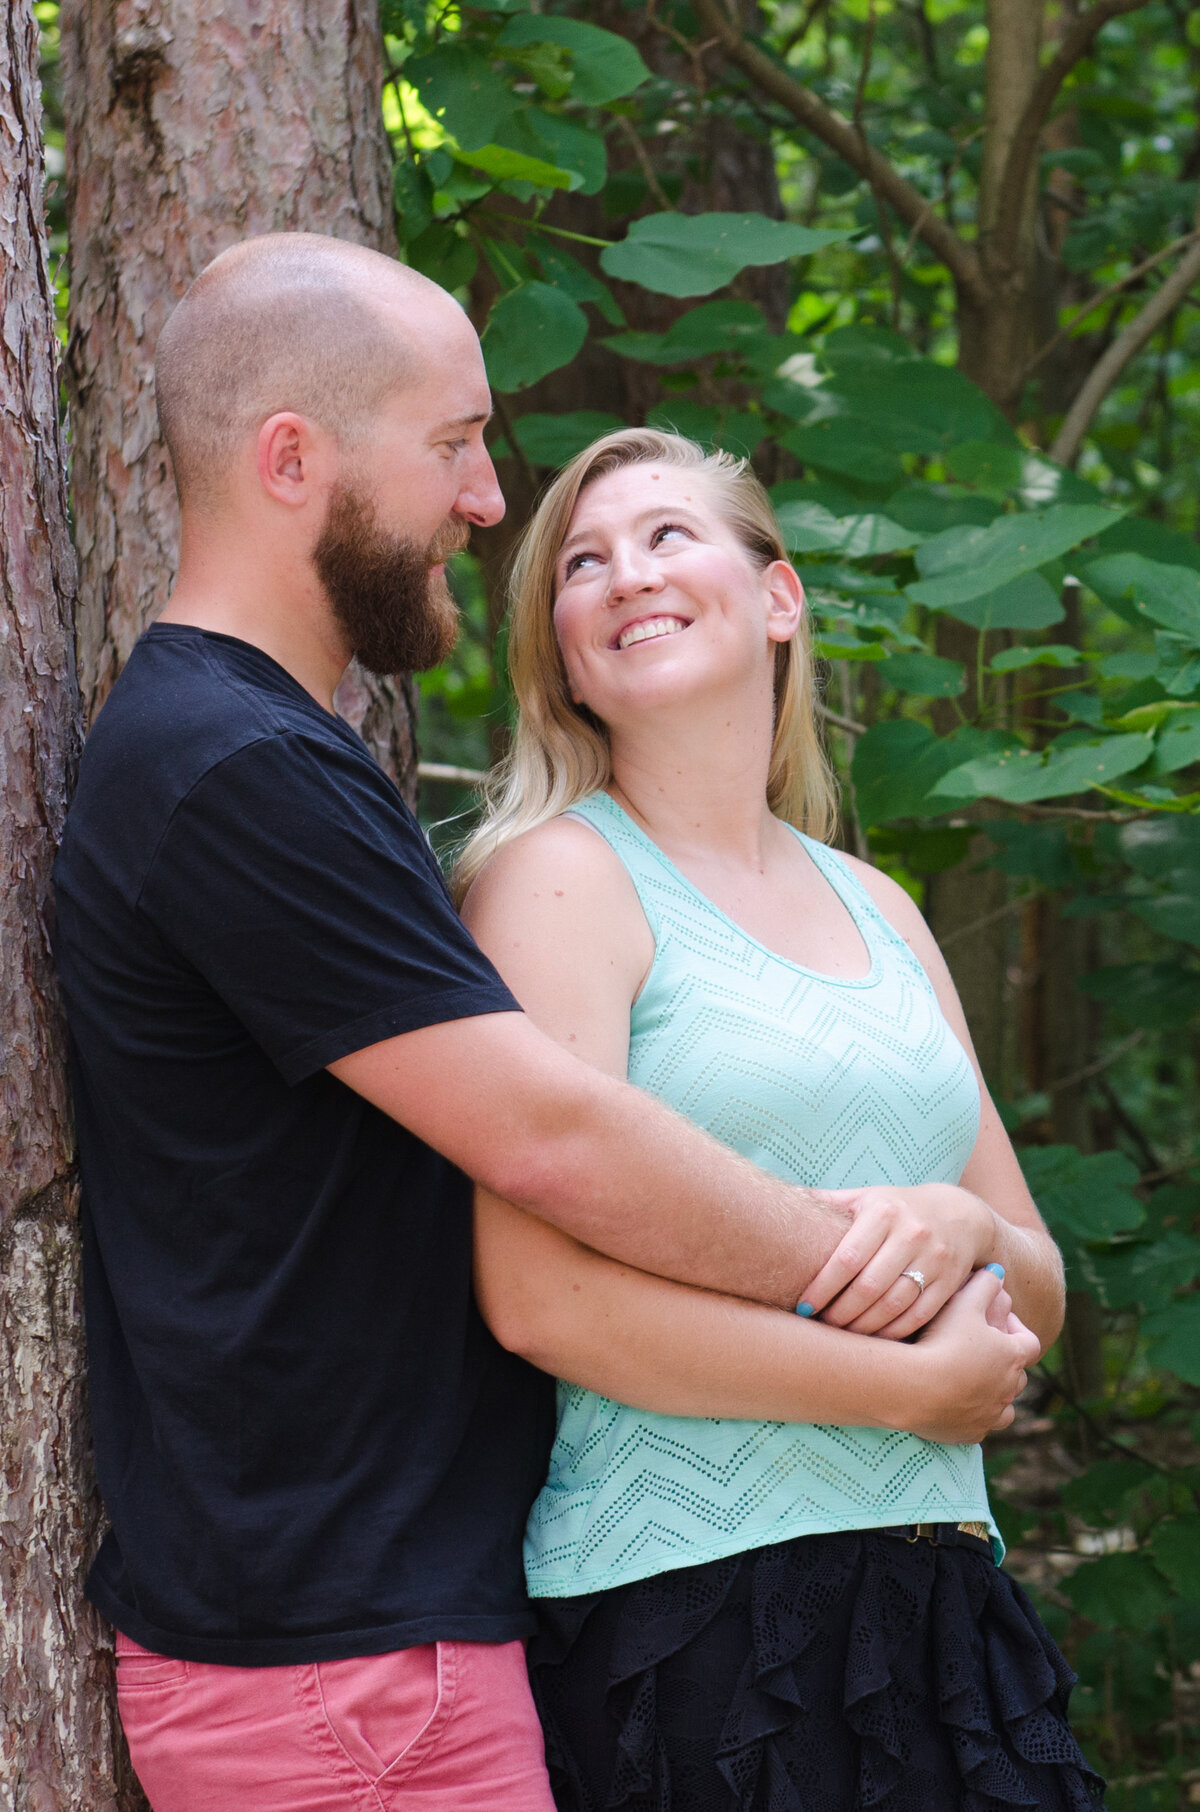 Bride-to-be looks up at fiancé leaning against a tree at Twin Lakes Park in Greensburg, PA